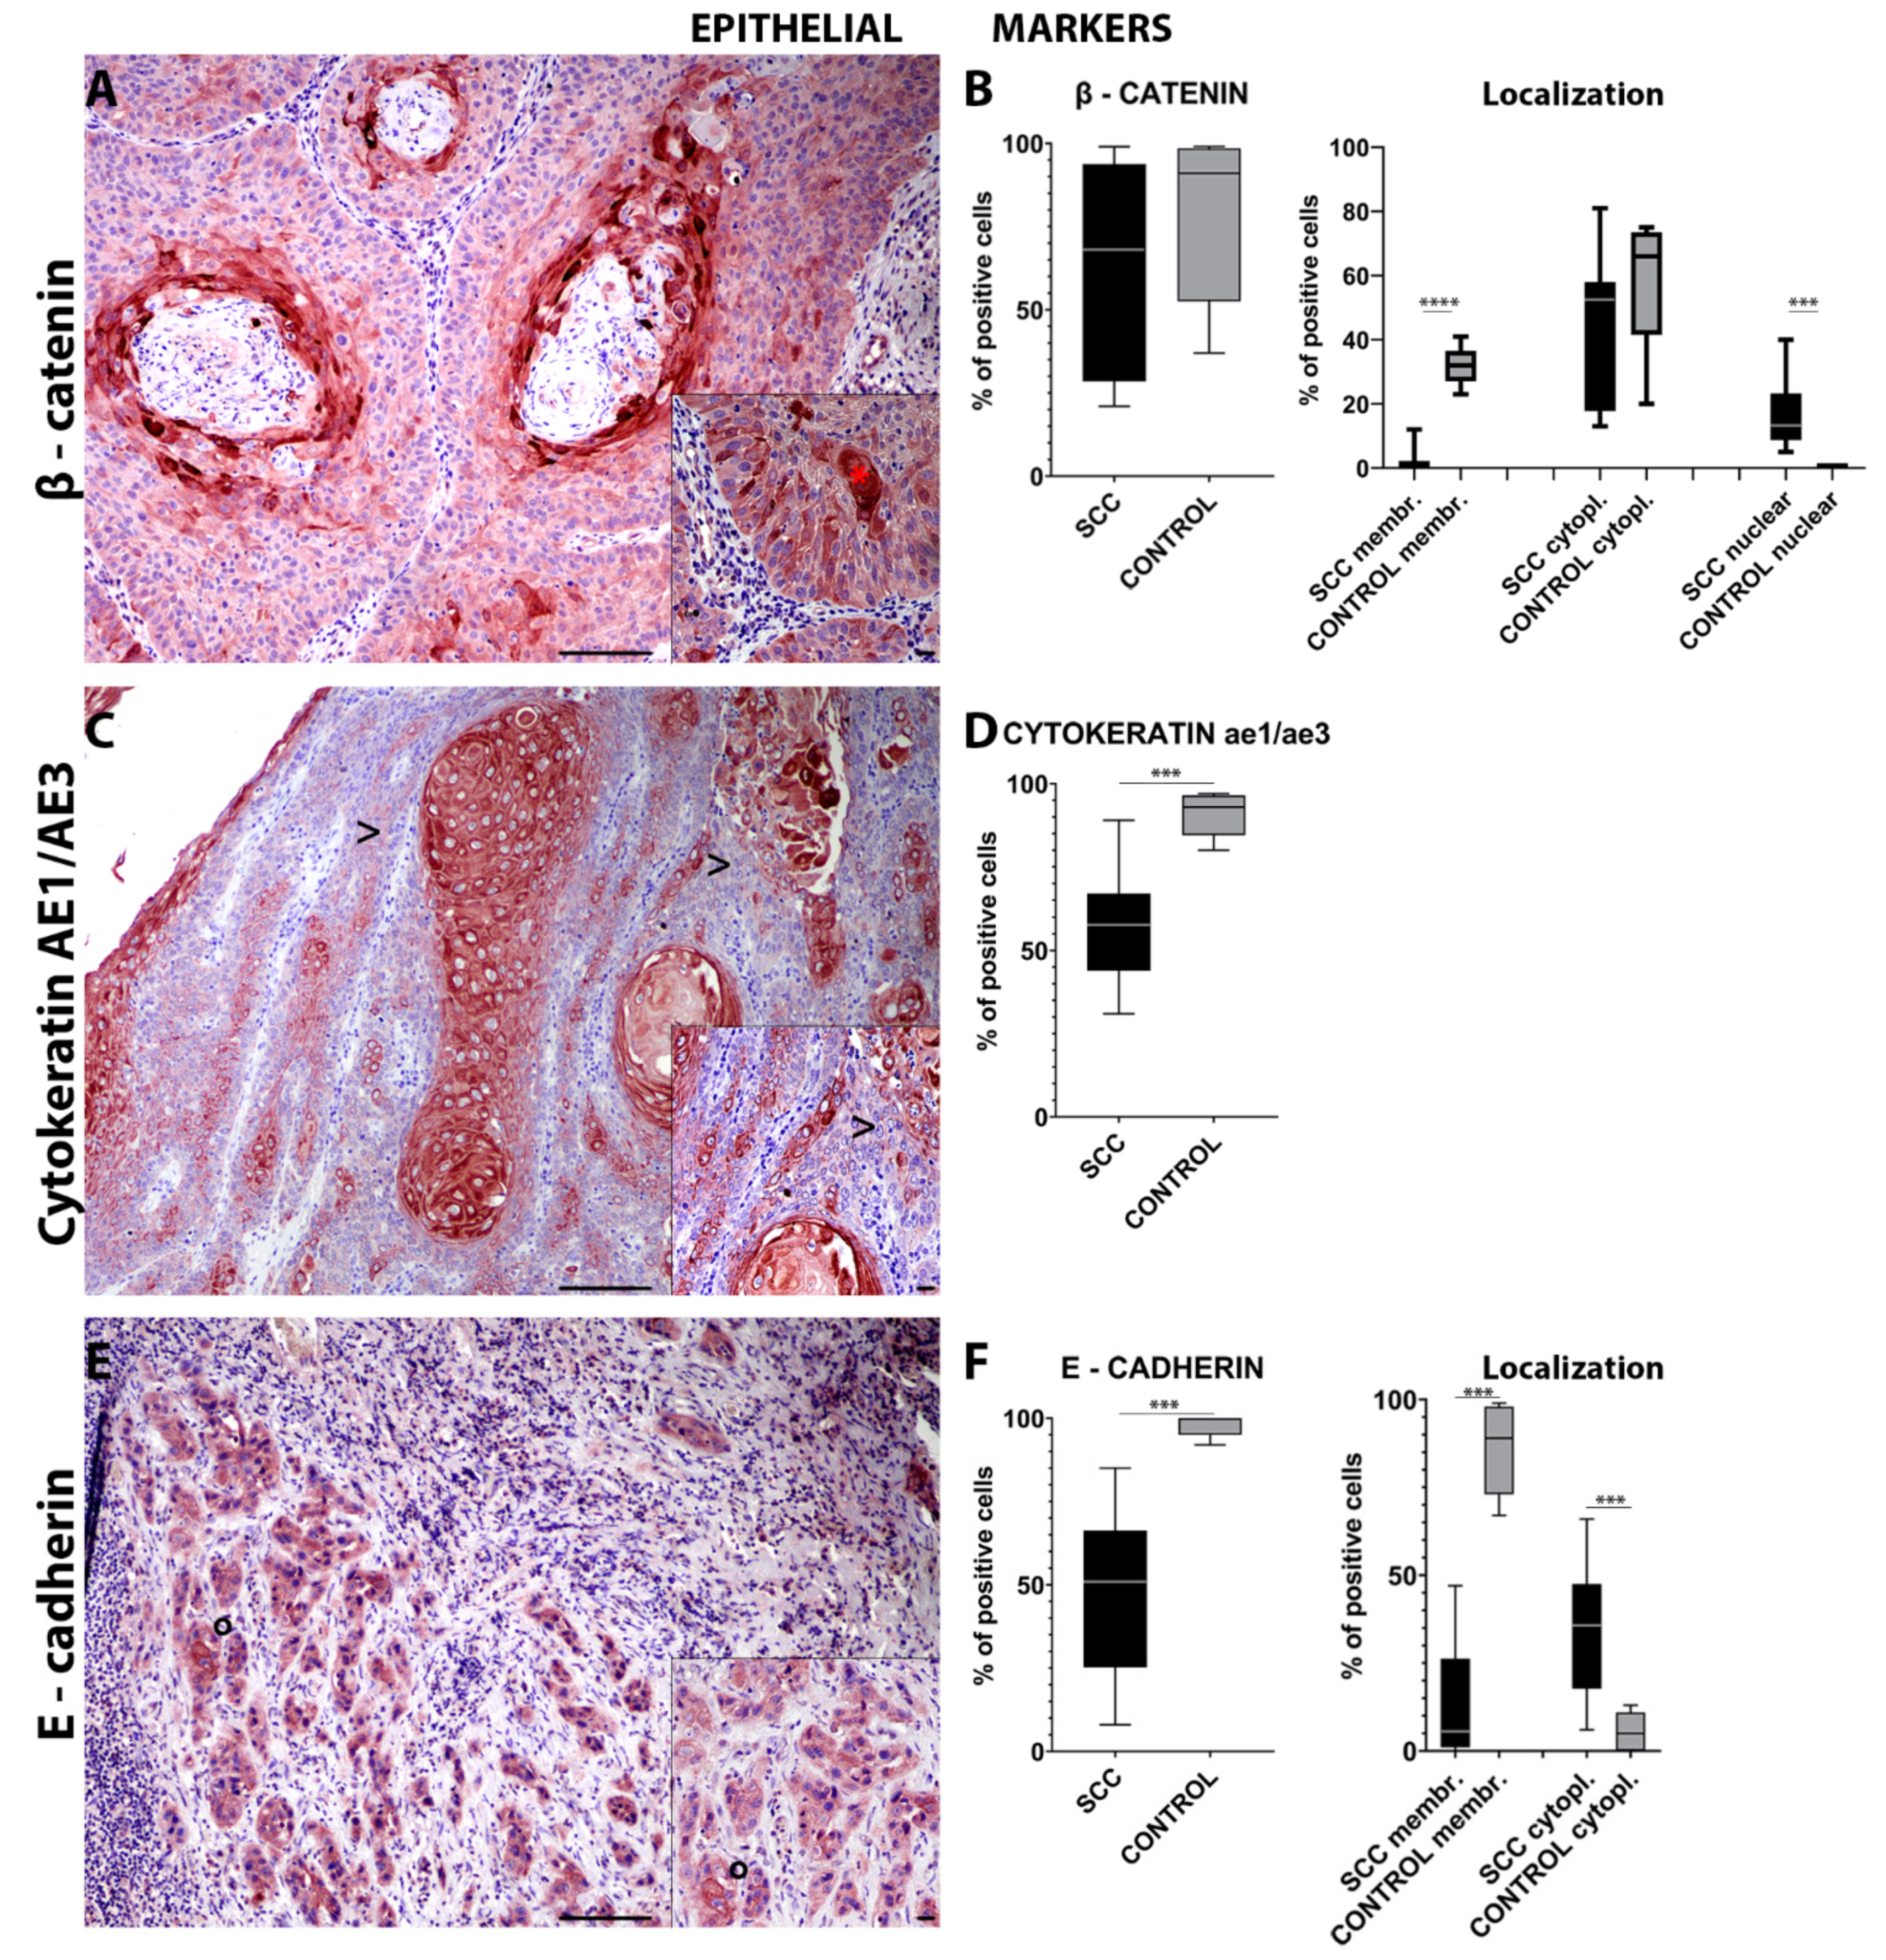 IJMS | Free Full-Text | Investigation of the Epithelial to Mesenchymal  Transition (EMT) Process in Equine Papillomavirus-2 (EcPV-2)-Positive Penile  Squamous Cell Carcinomas | HTML